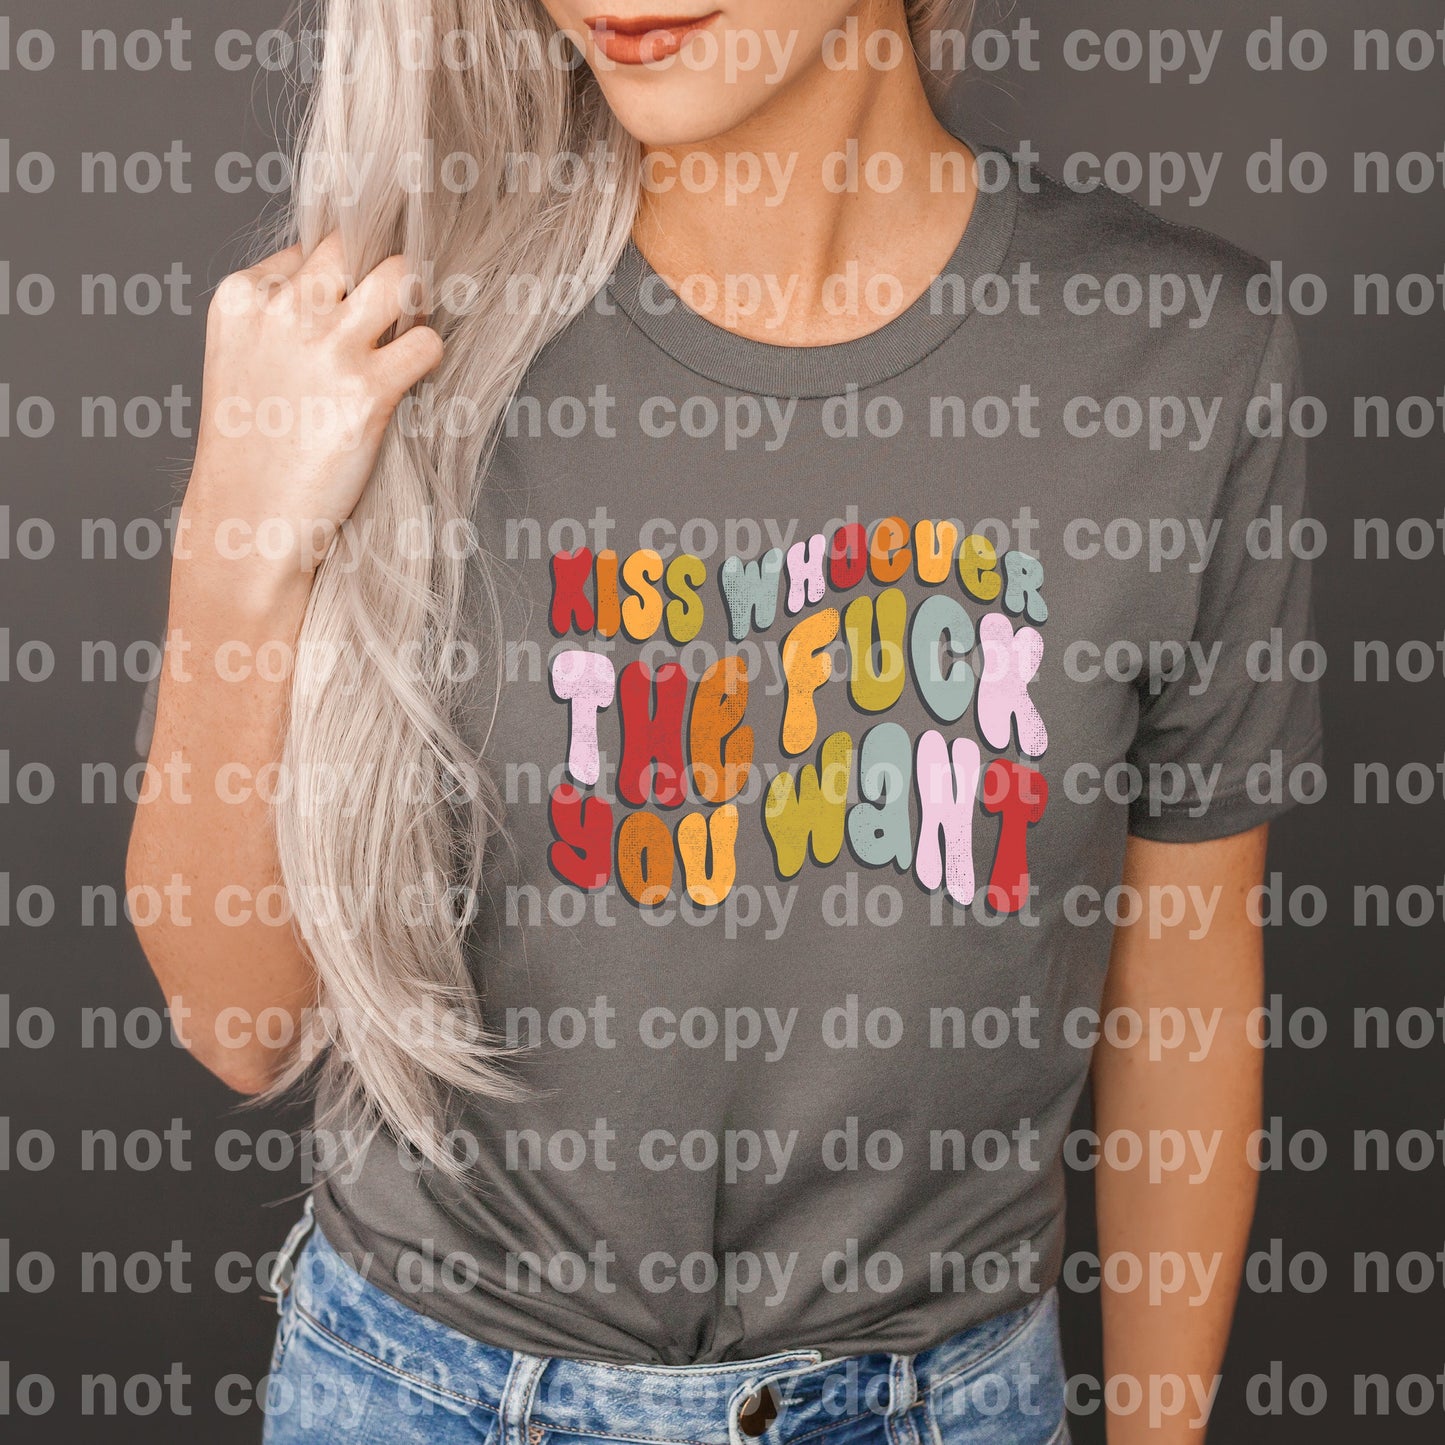 Kiss Whoever The Fuck You Want Full Color/One Color Dream Print or Sublimation Print